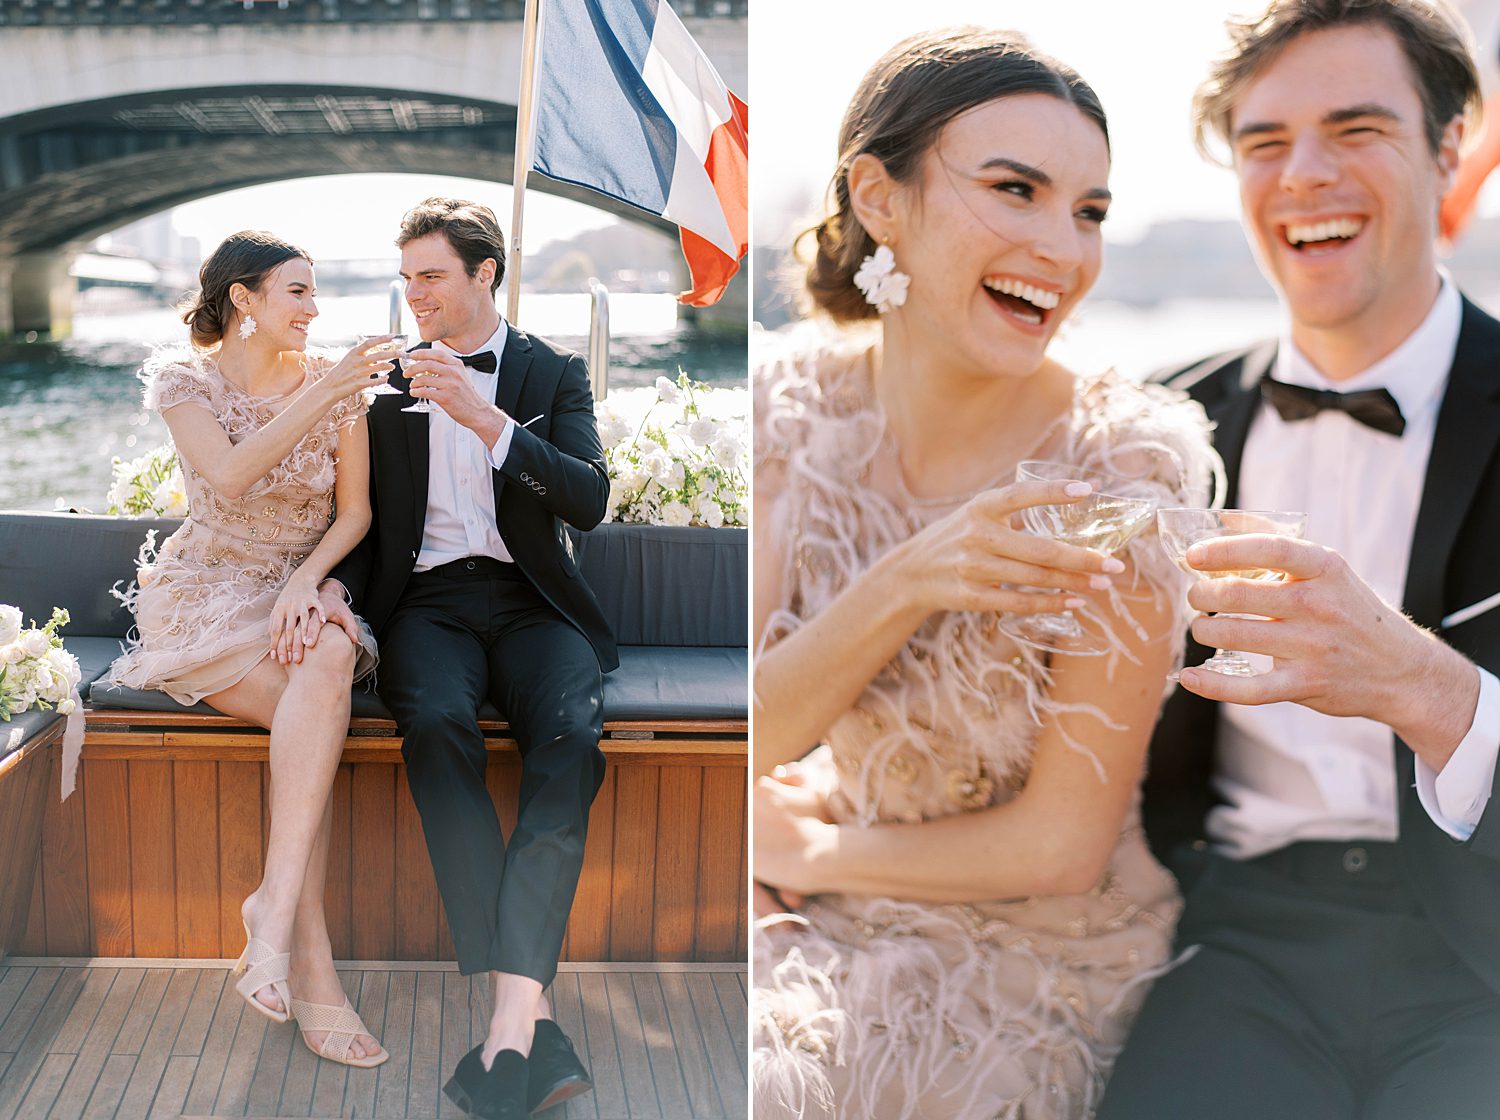 newlyweds toast champagne on river boat in Paris